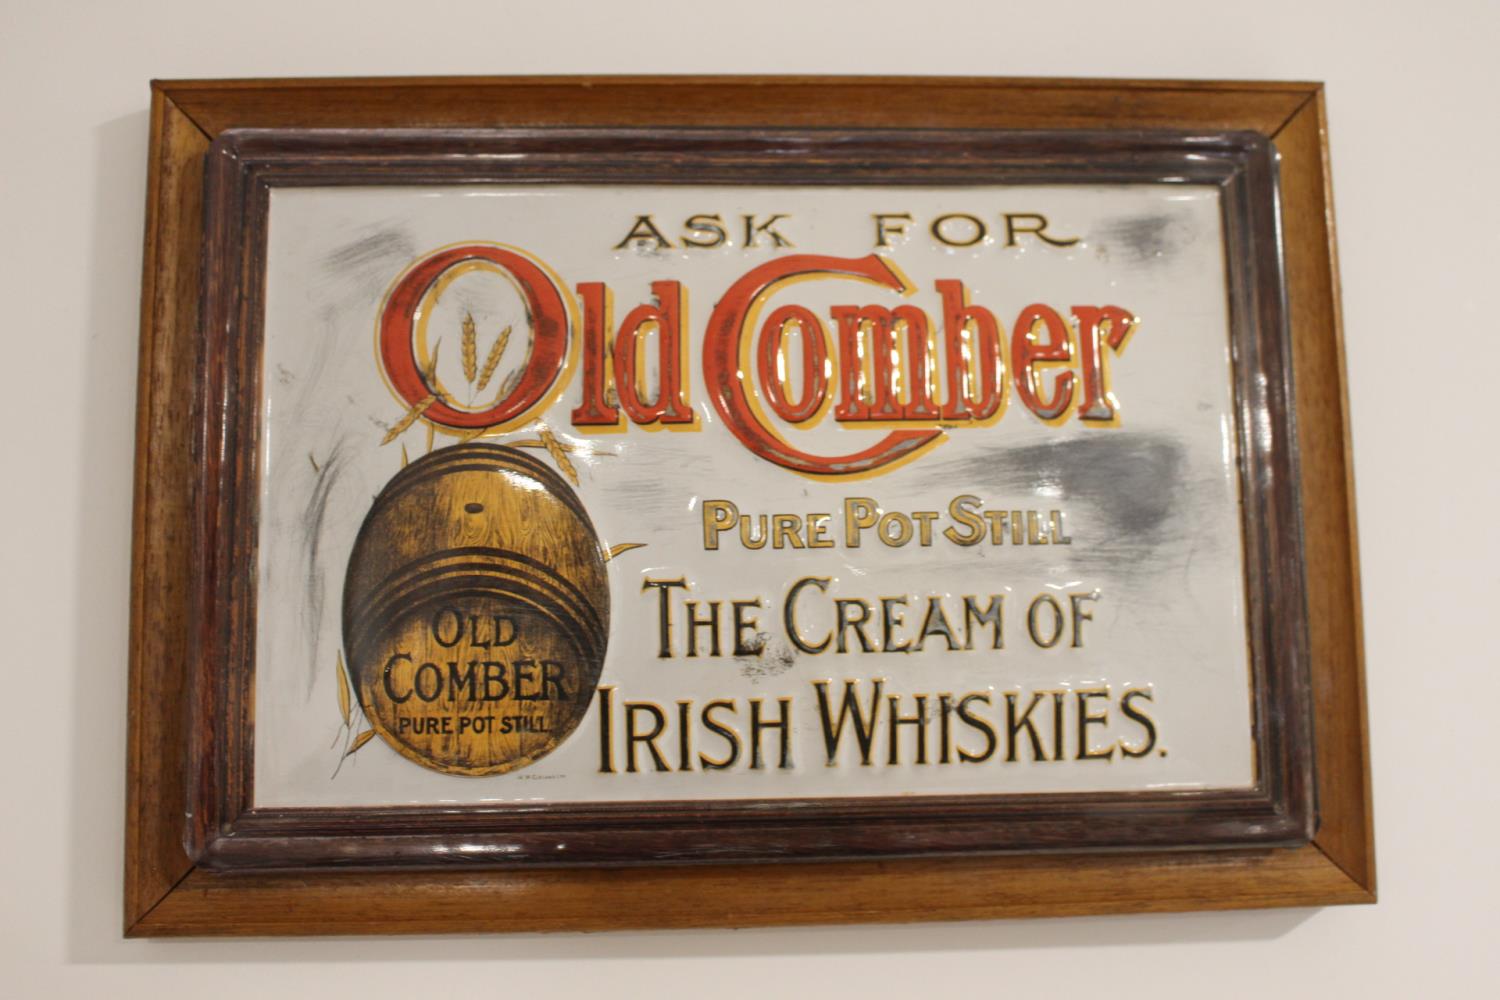 Ask For Old Comber Pure Pot Still The Cream Of Irish Whiskies embossed advertising sign .